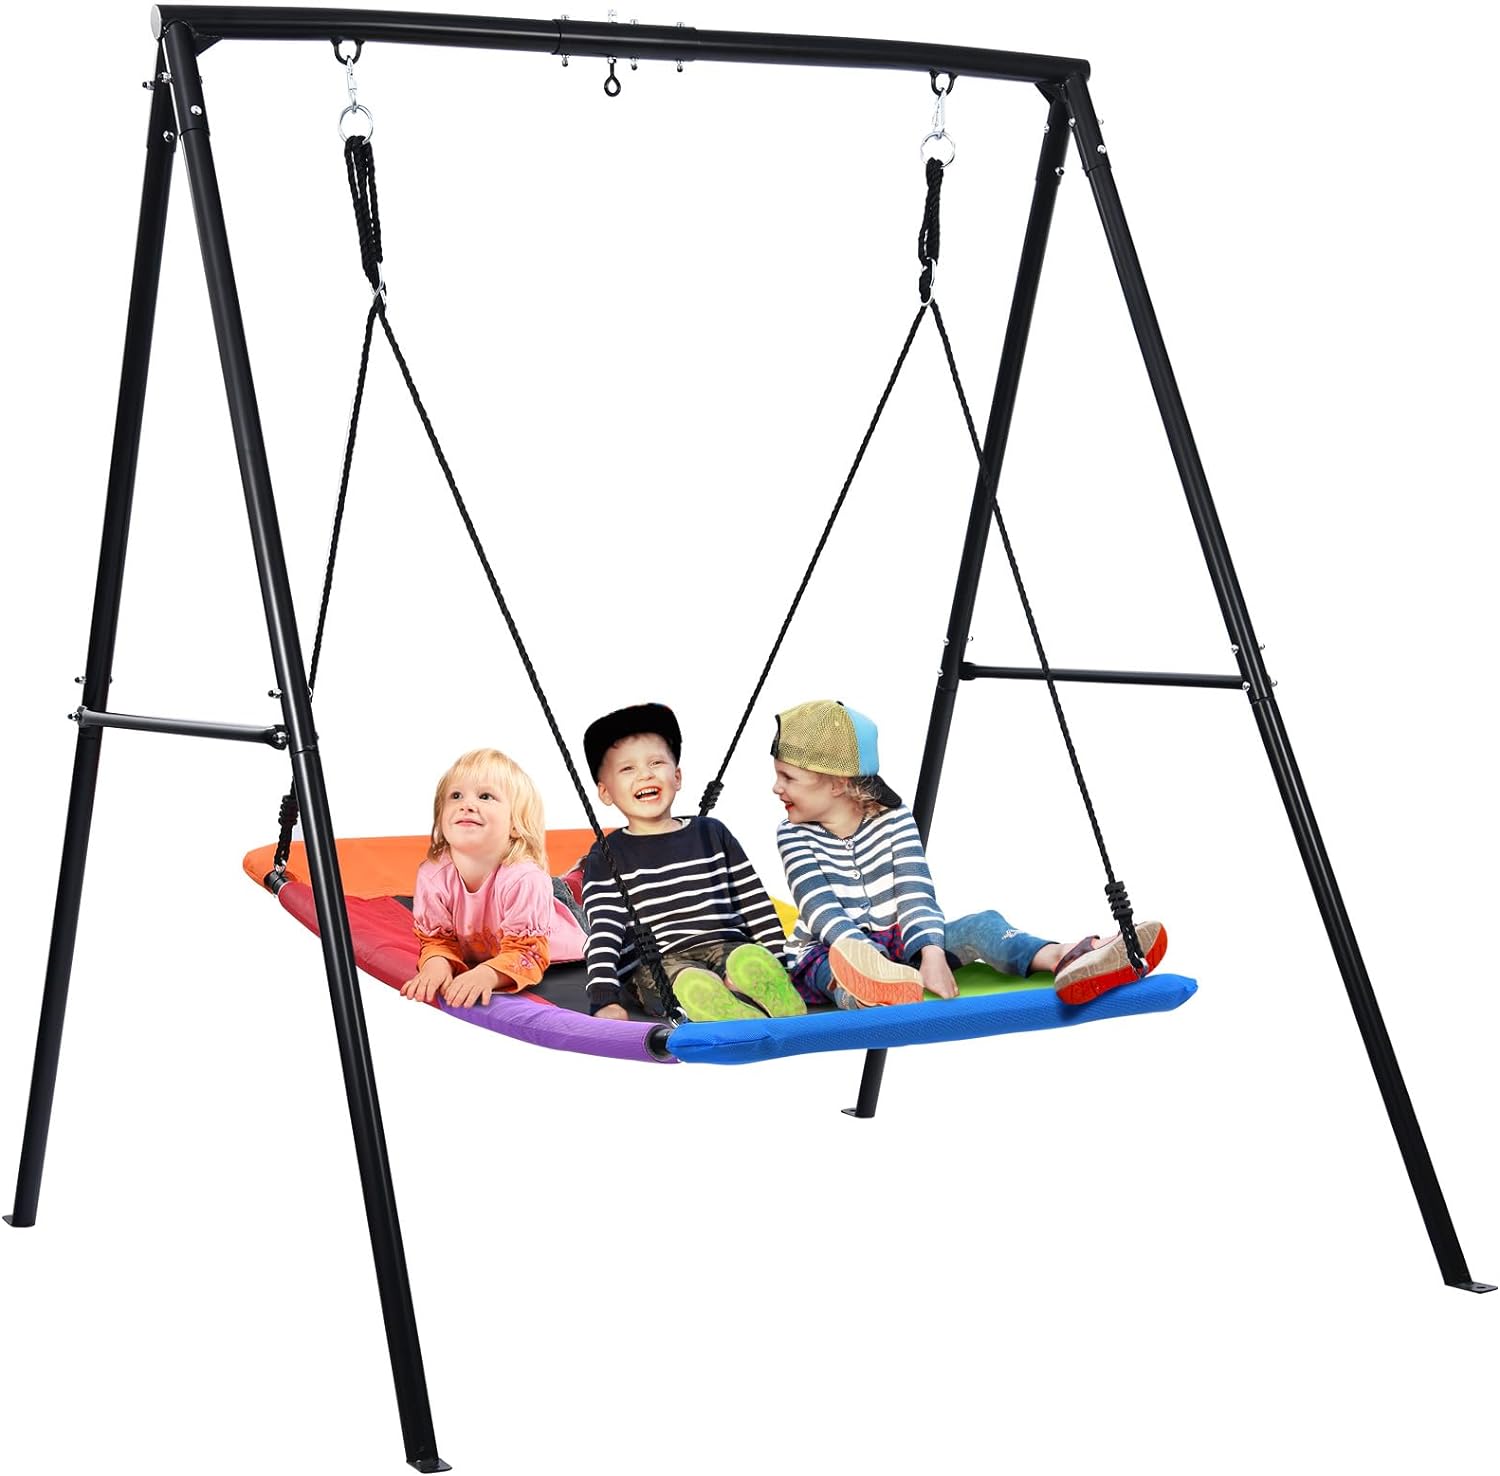 Trekassy 440lbs Heavy Duty A-Frame Metal Swing Stand with 60